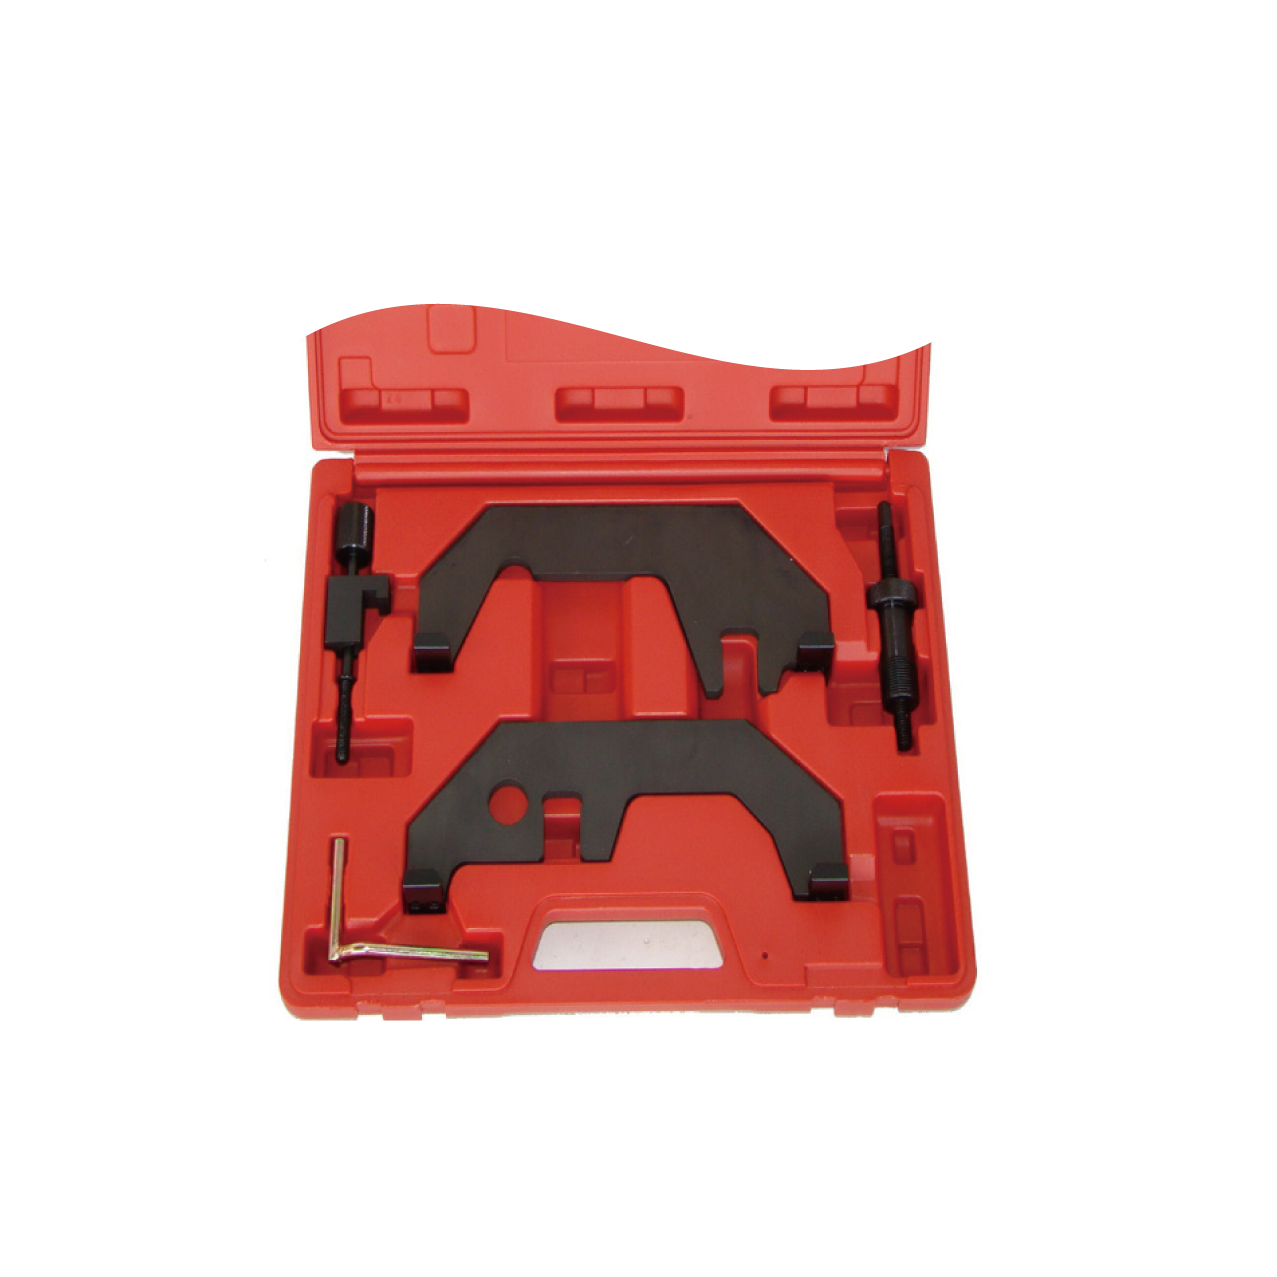 Input/ Output Camshaft Alignment Tool Set for BMW N62/ N73